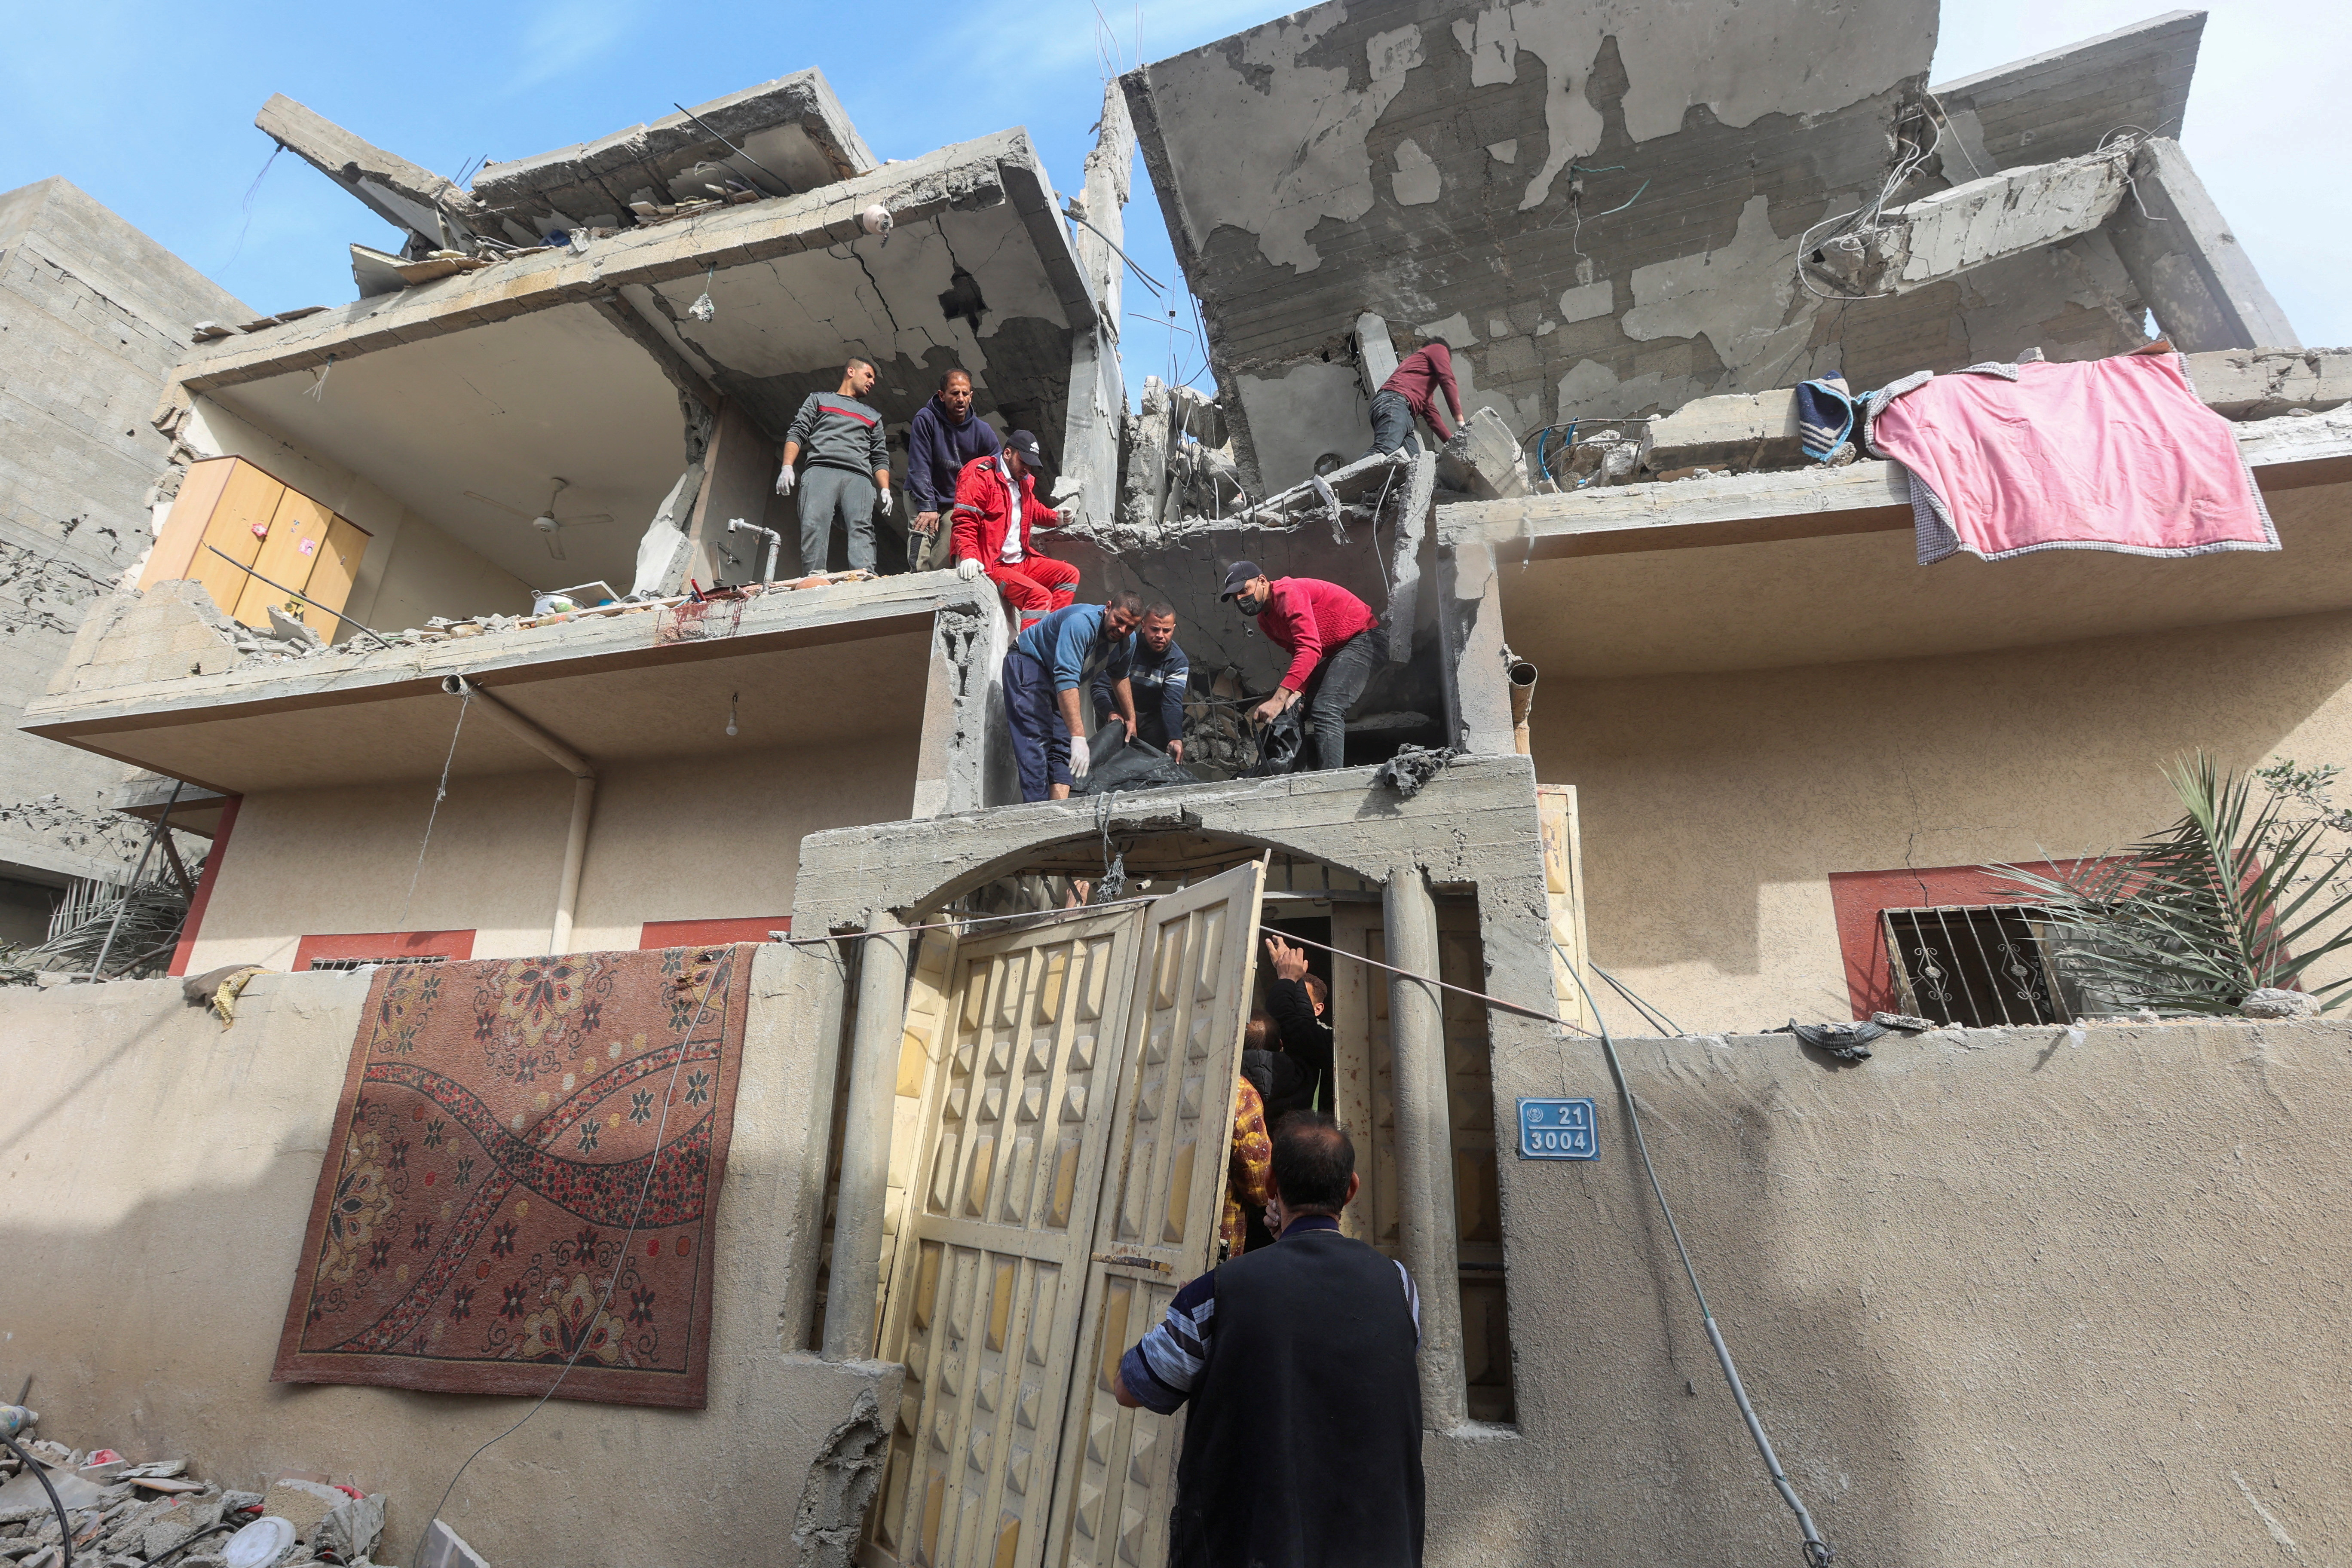 Palestinians inspect the site of an Israeli strike on a house, in Rafah, in the southern Gaza Strip